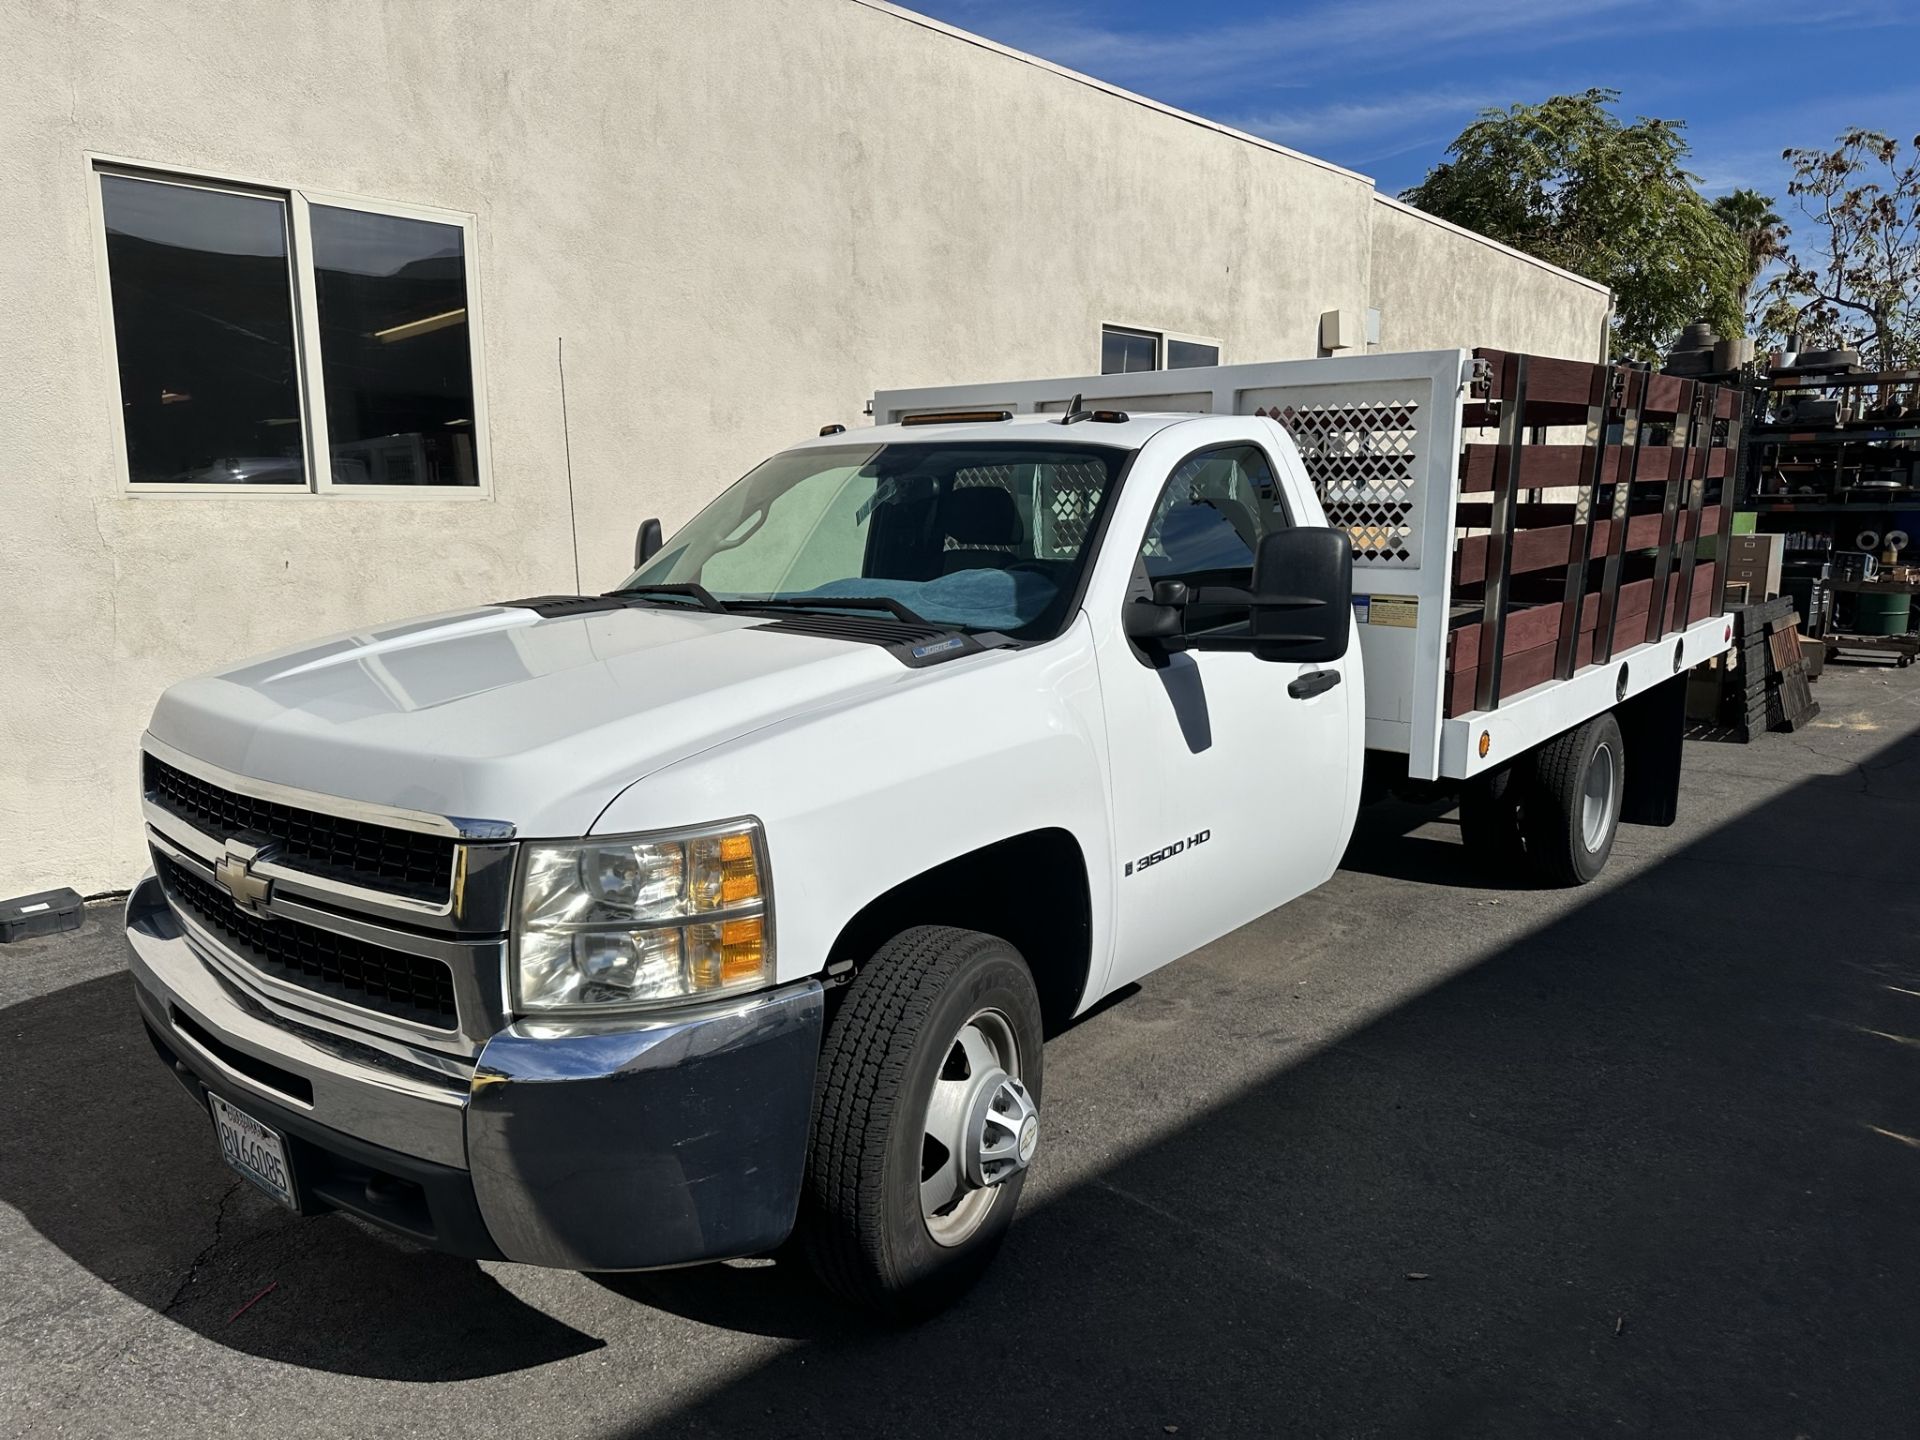 2009 CHEVY 3500 HD 12' STAKE BED TRUCK, GASOLINE, STANDARD CAB, APPROX. 52,587 MILES, VIN: